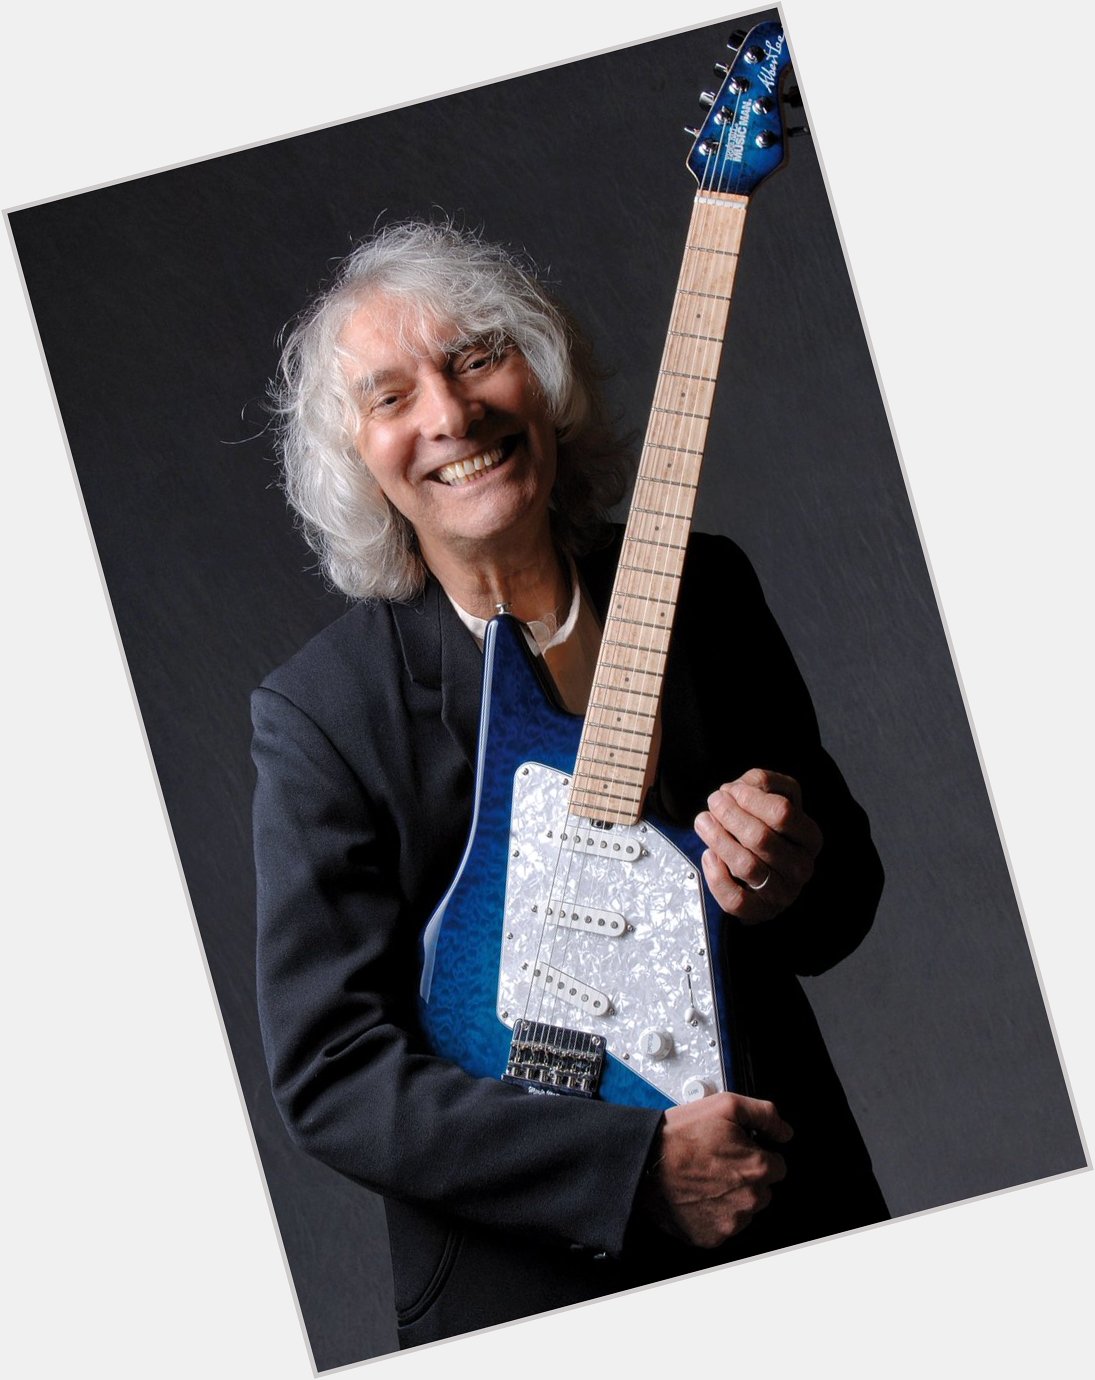 It s also a Happy Birthday to guitarist Albert Lee, born this day in 1943 